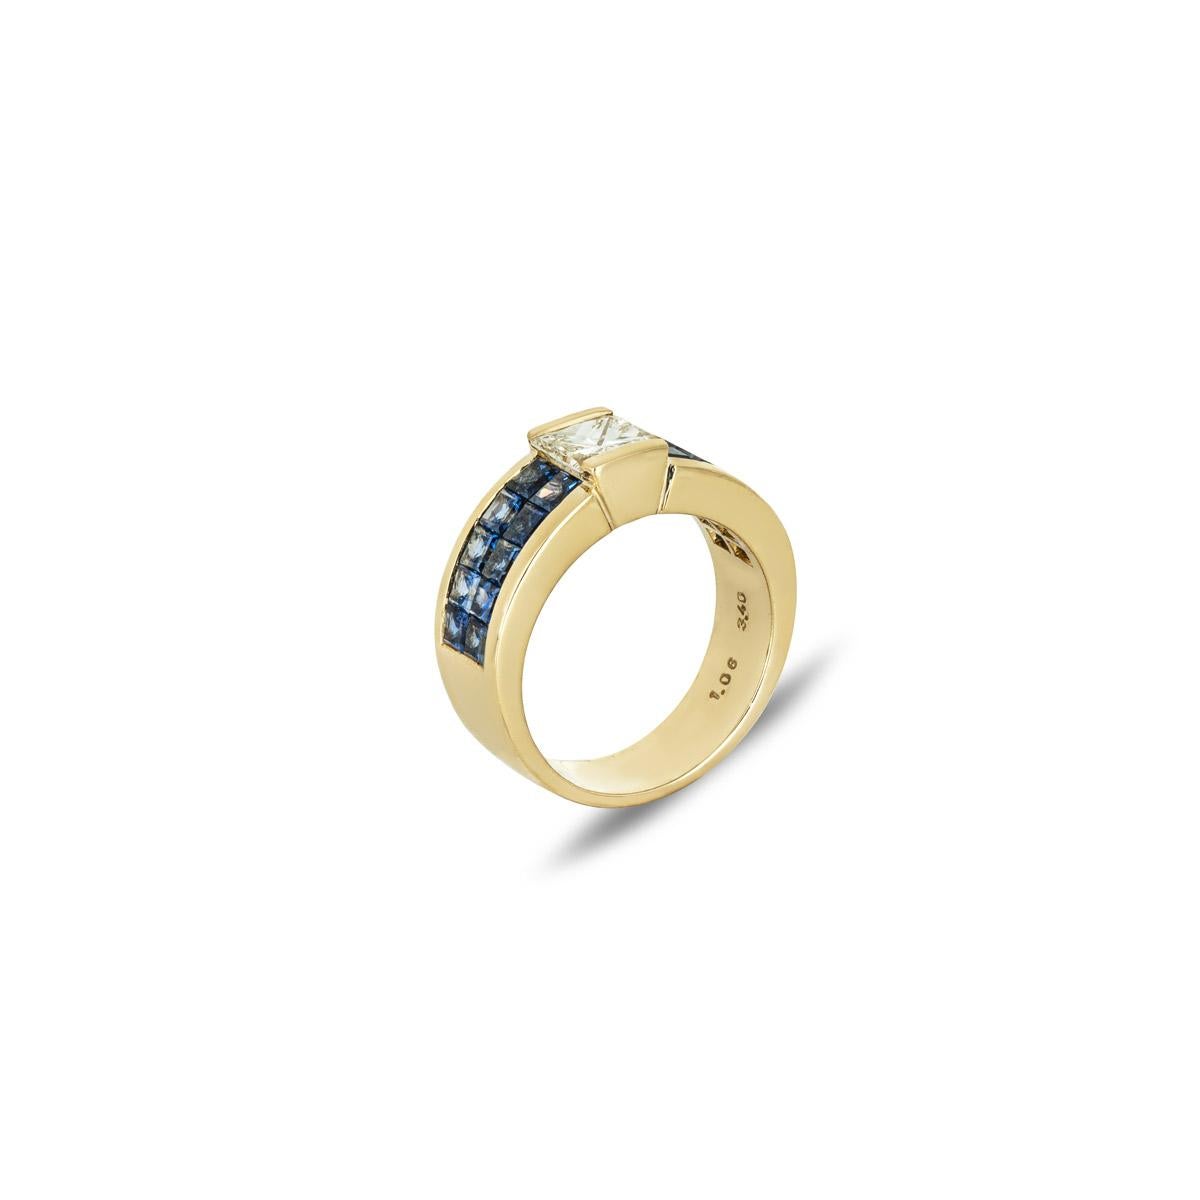 An 18k yellow gold diamond and sapphire dress ring. The ring is set to the centre in a tension setting with an approximate weight of 1.06ct, L-M colour and VS clarity. Further complementing the diamond are 10 princess cut sapphires invisible set to